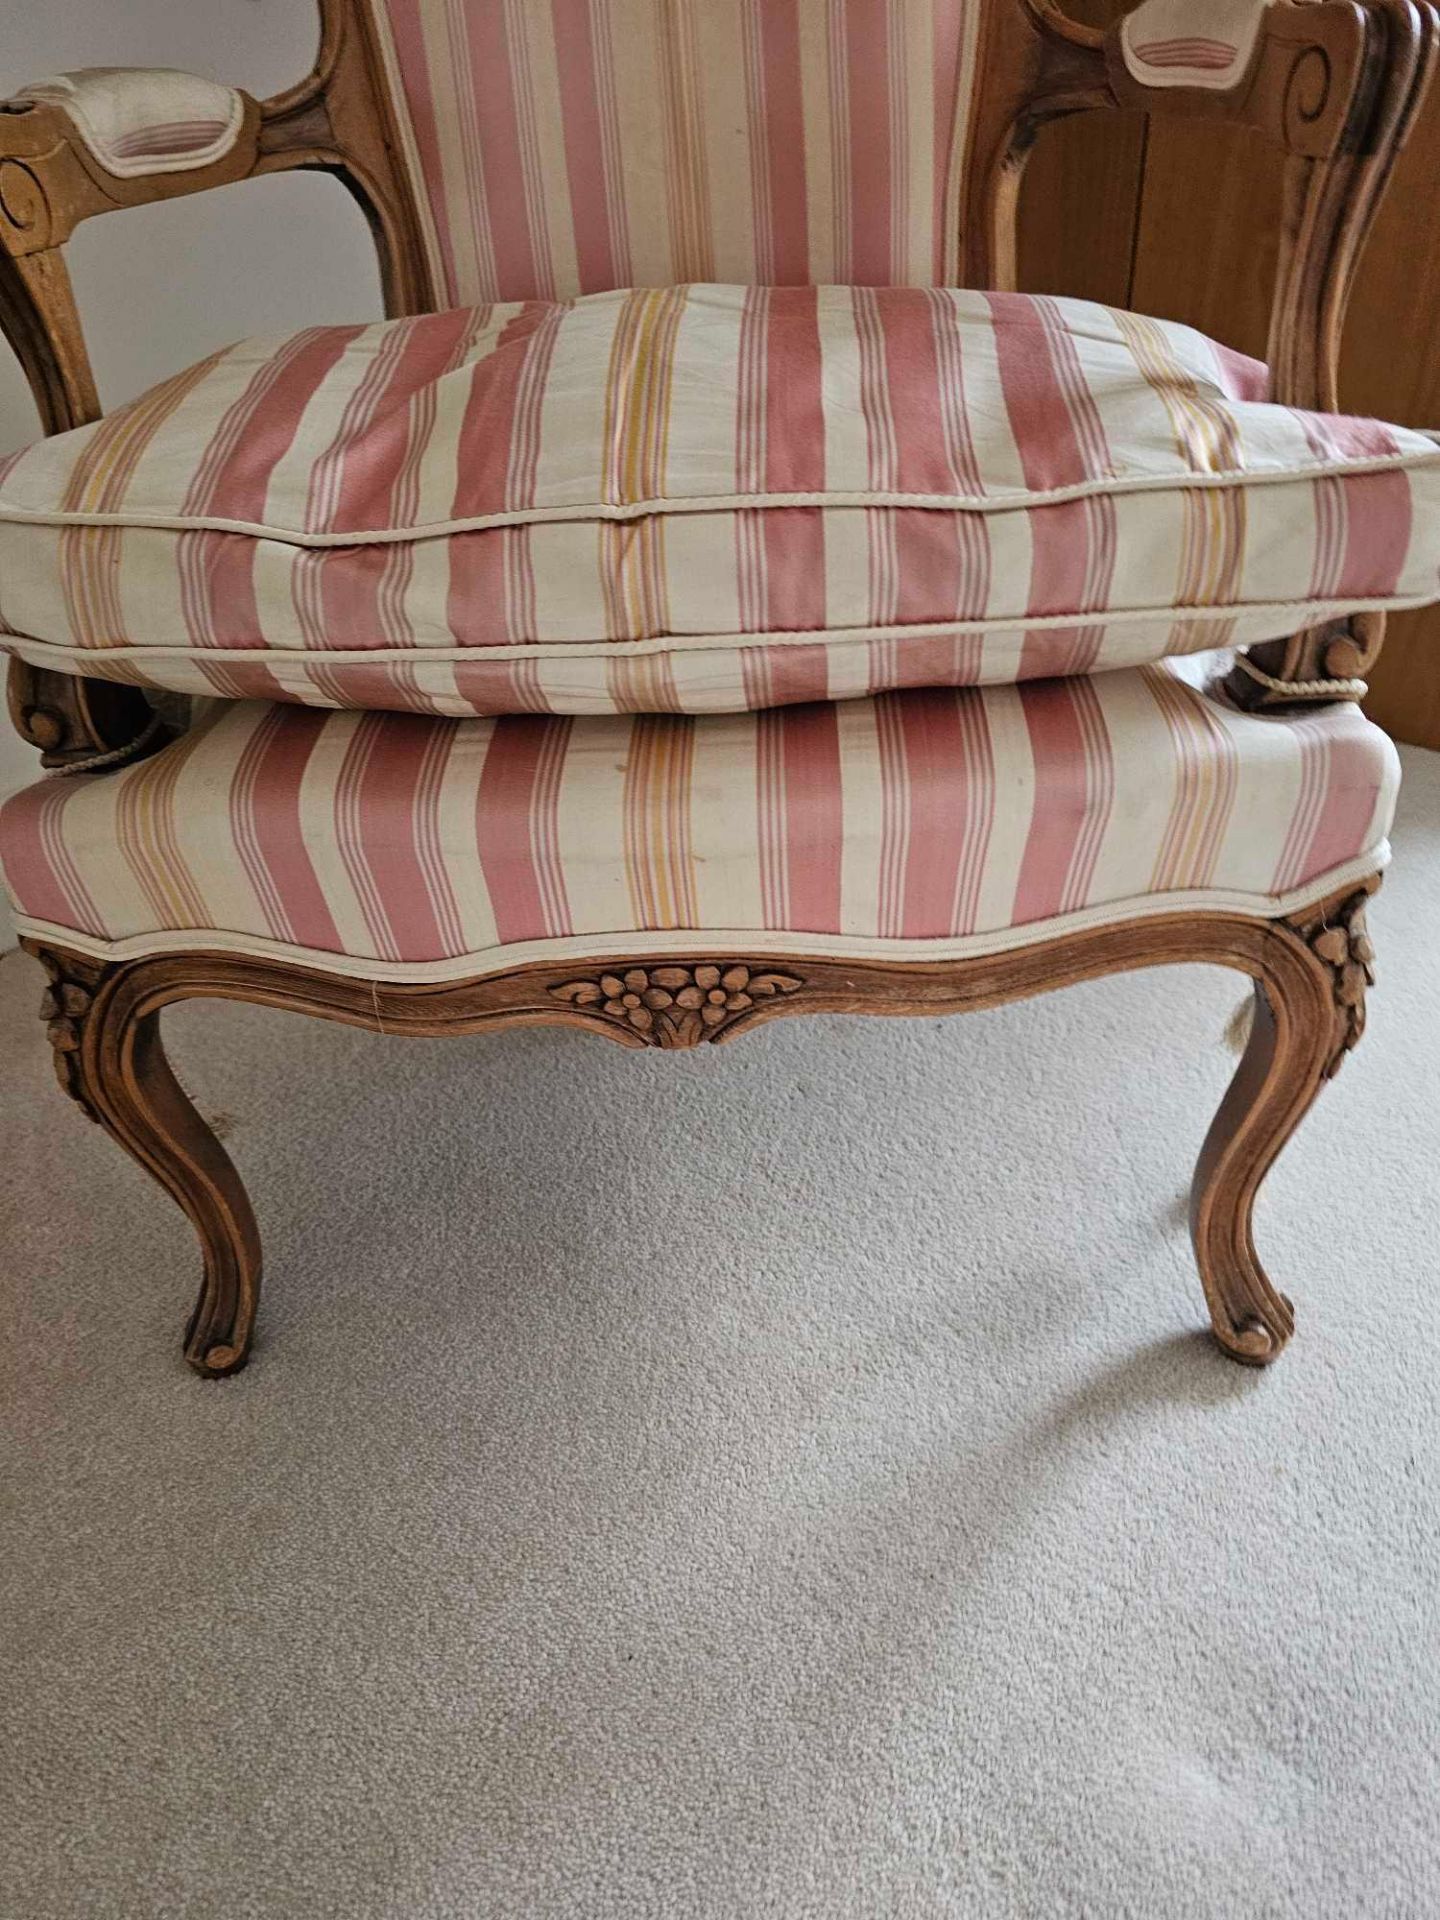 A Louis XV Style Beechwood Fauteuil The Shaped Rectangular Back With Floral Cresting, Striped - Image 4 of 5